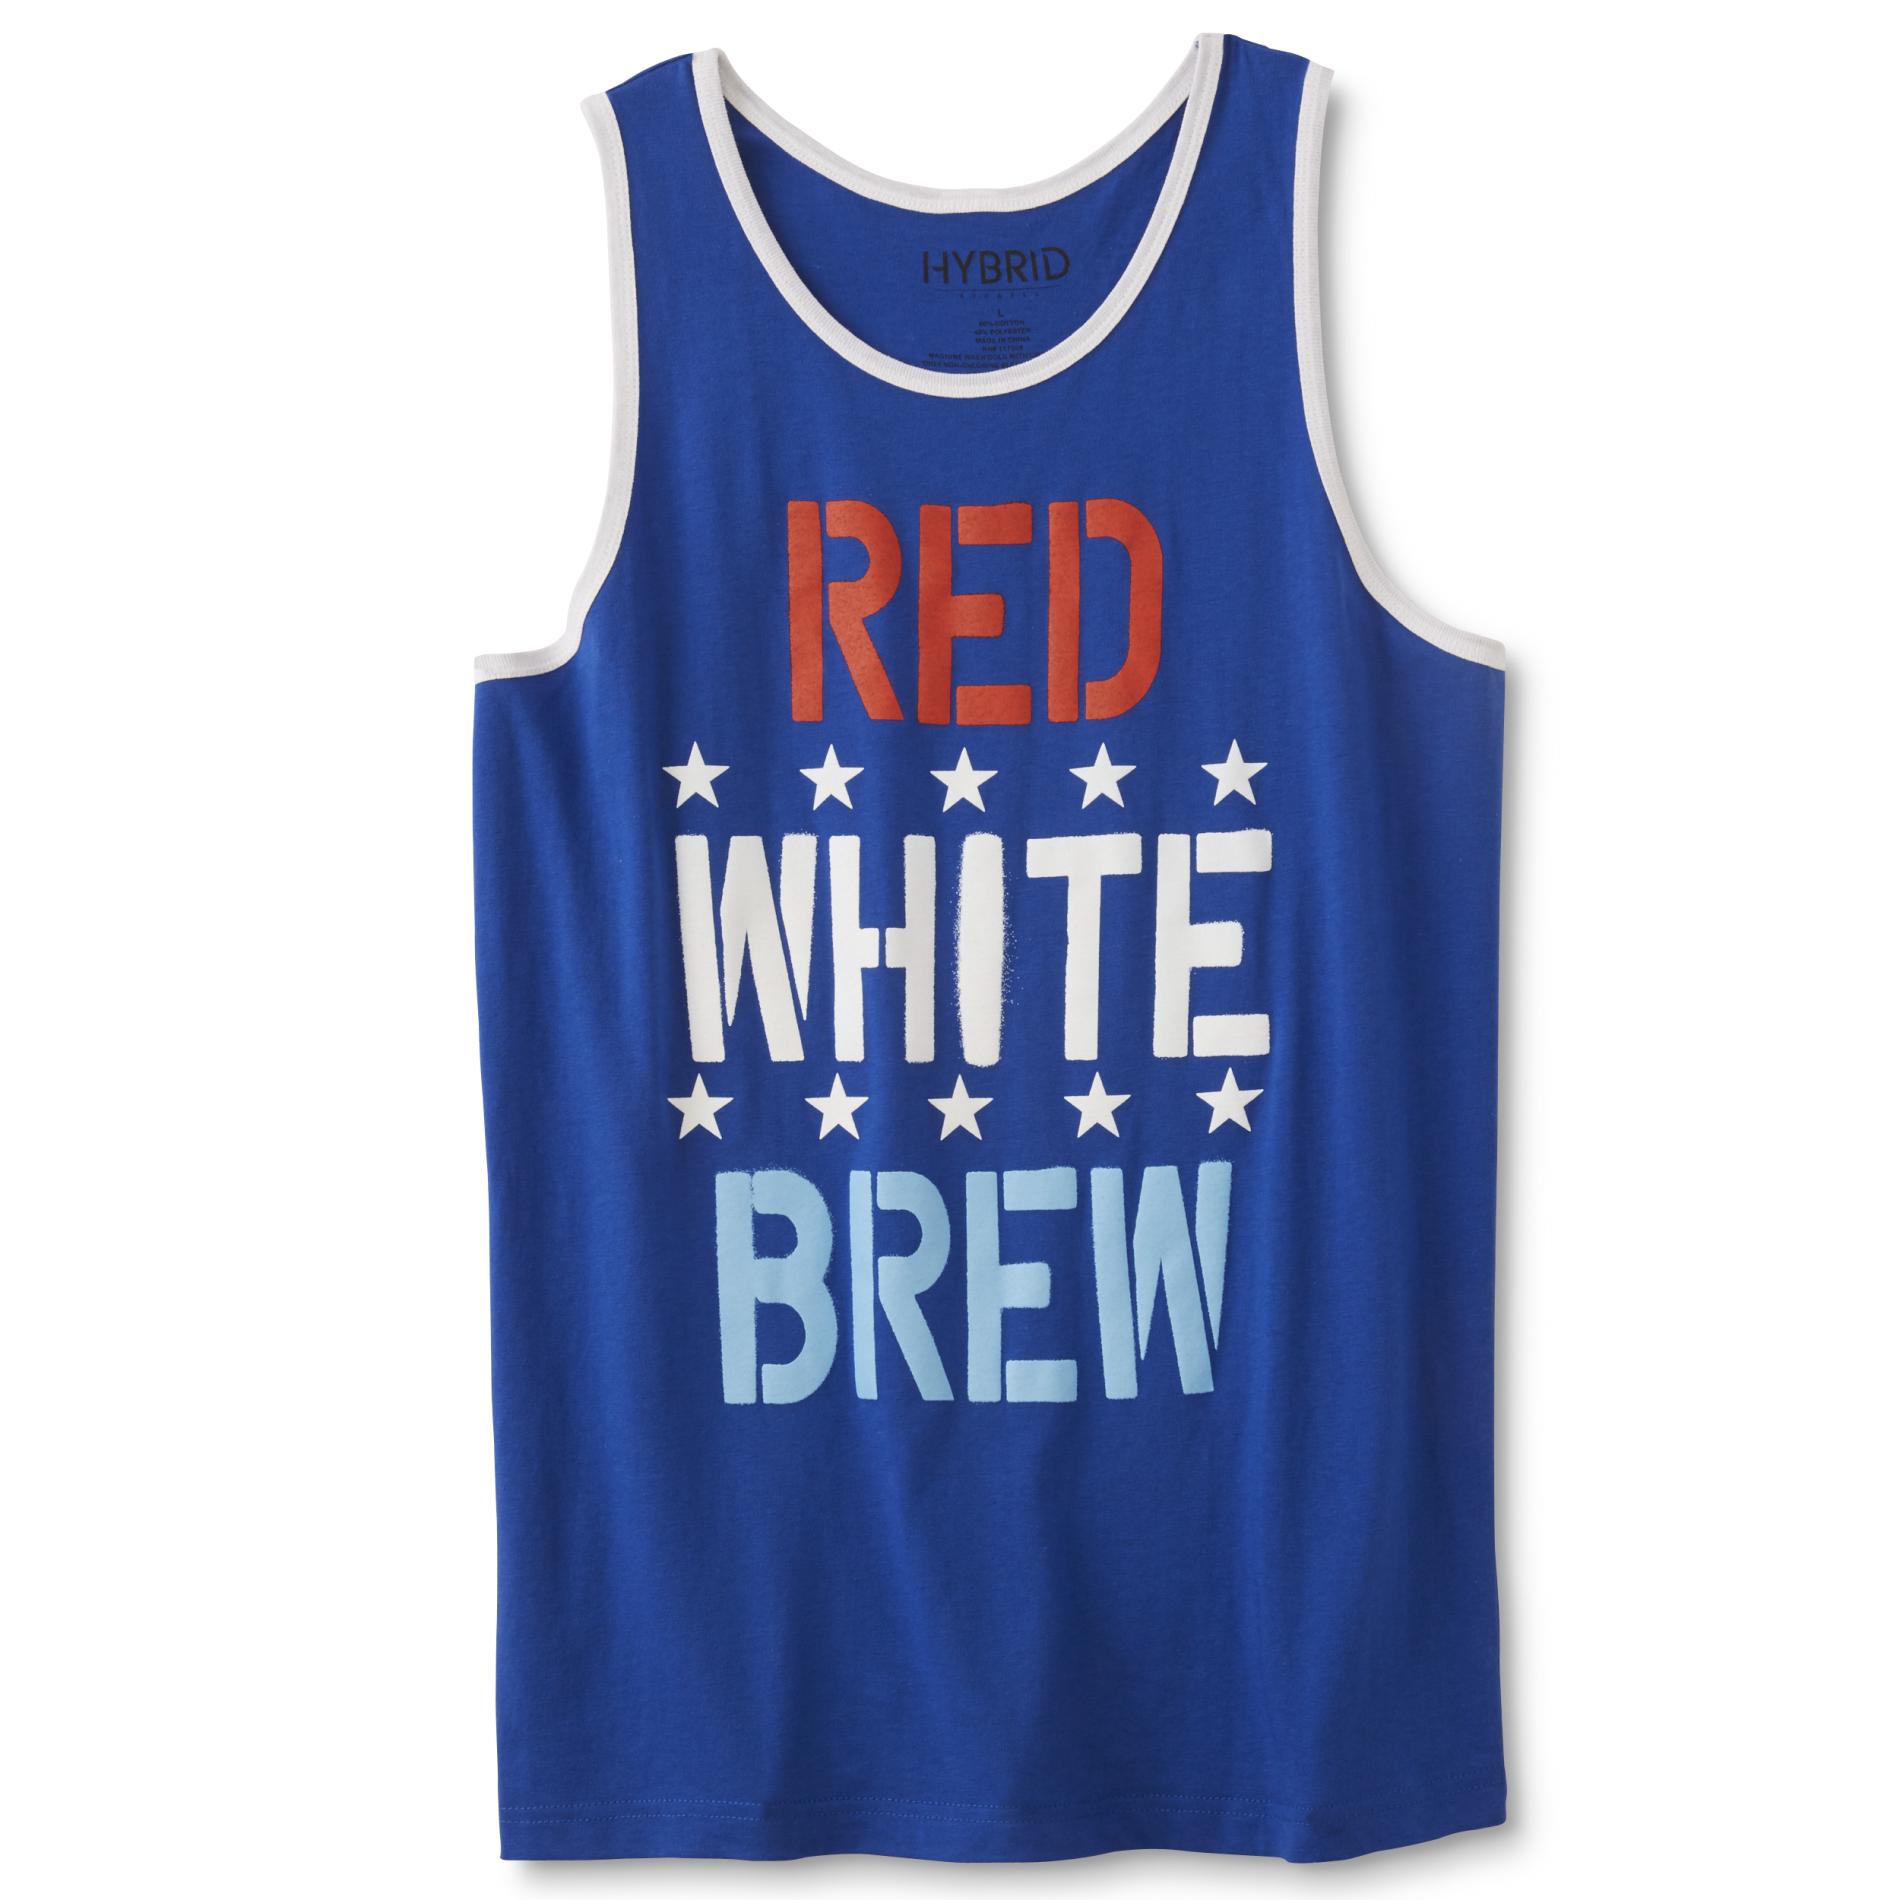 Young Men's Graphic Tank Top - Brew